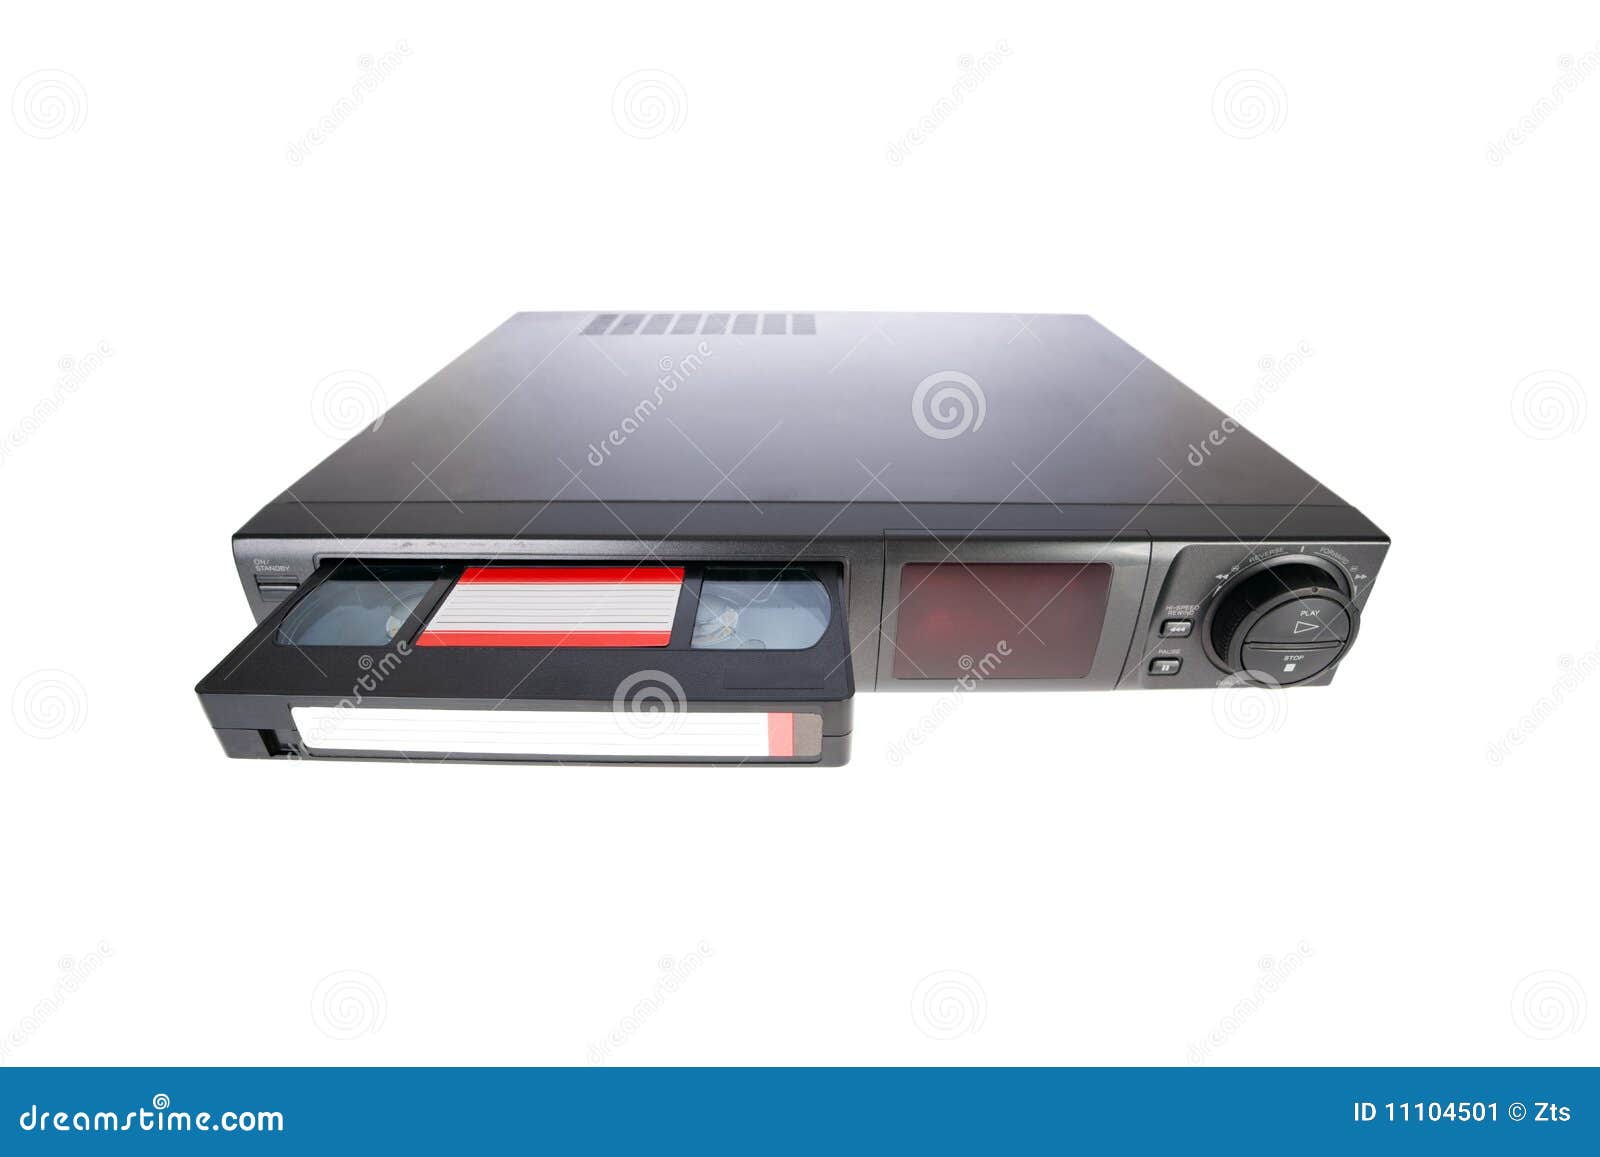 old video cassette recorder ejecting tape